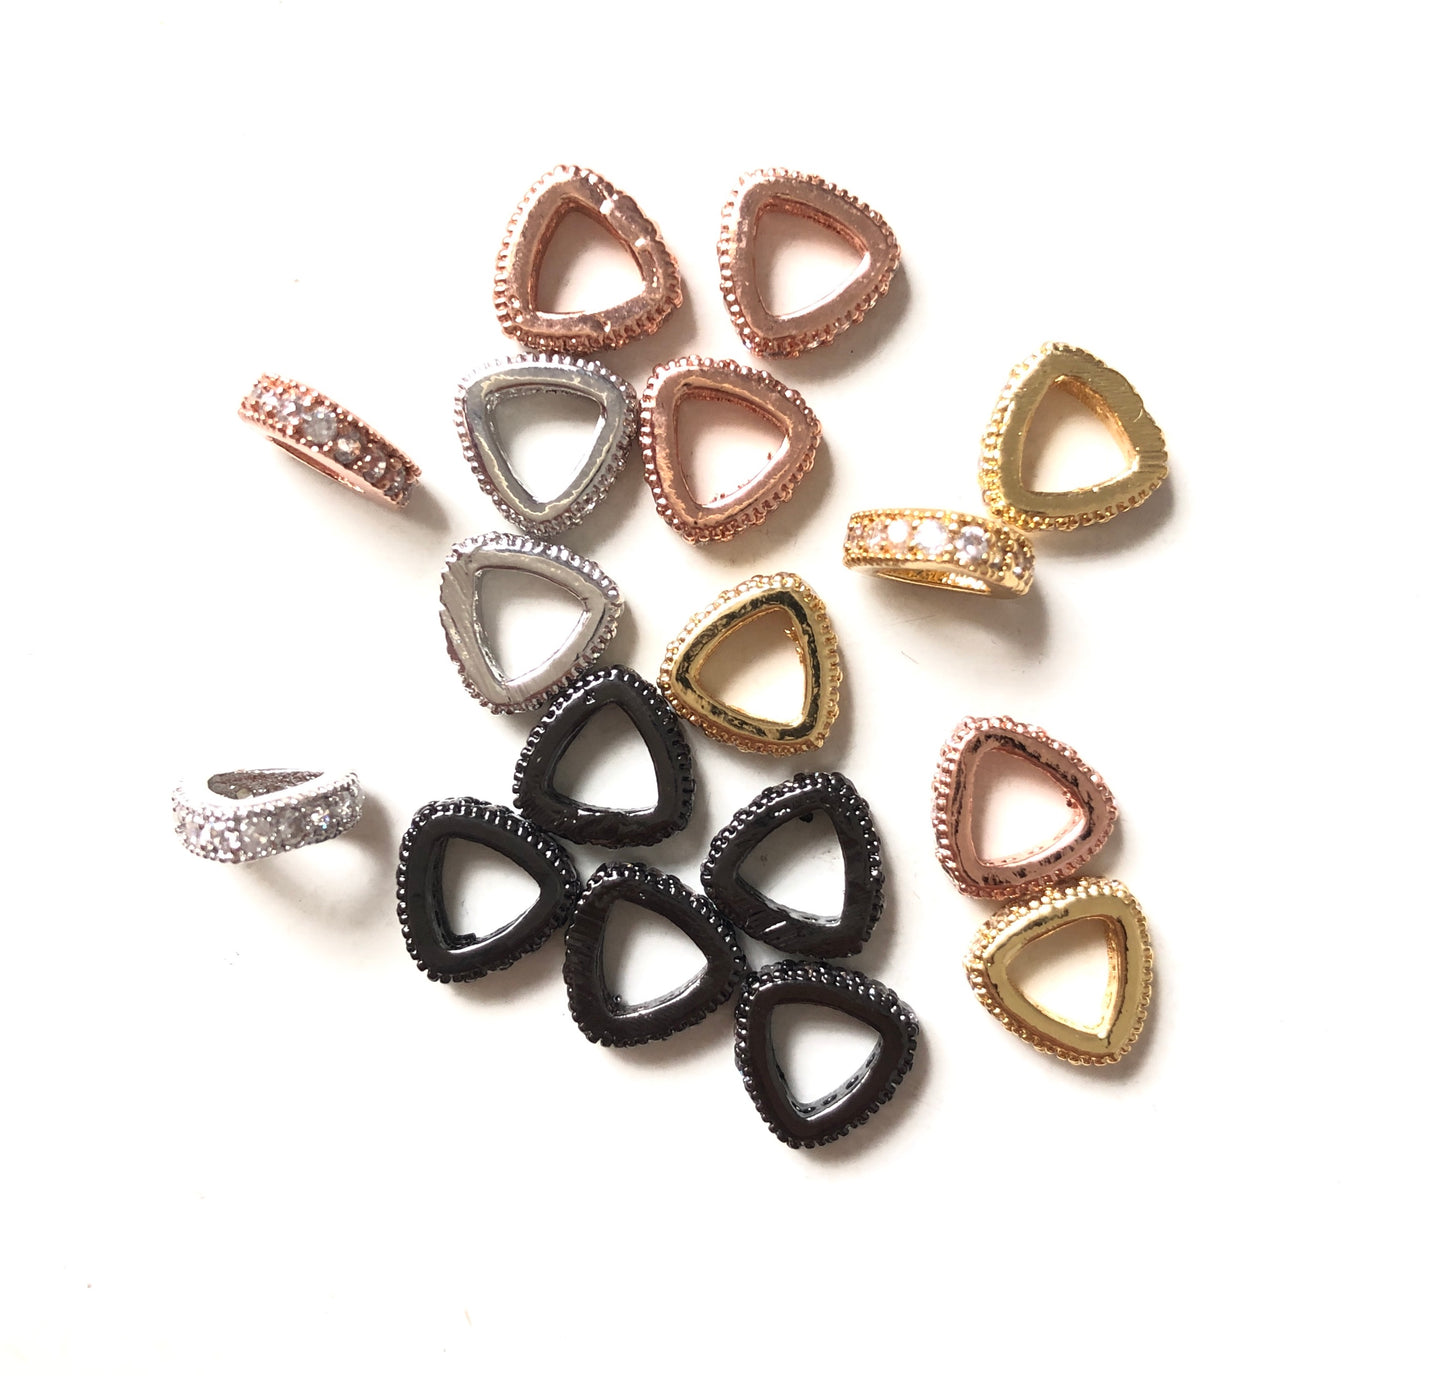 20pcs/lot 8*2.5mm CZ Paved Triangle Rondelle Spacers CZ Paved Spacers Rondelle Beads Charms Beads Beyond